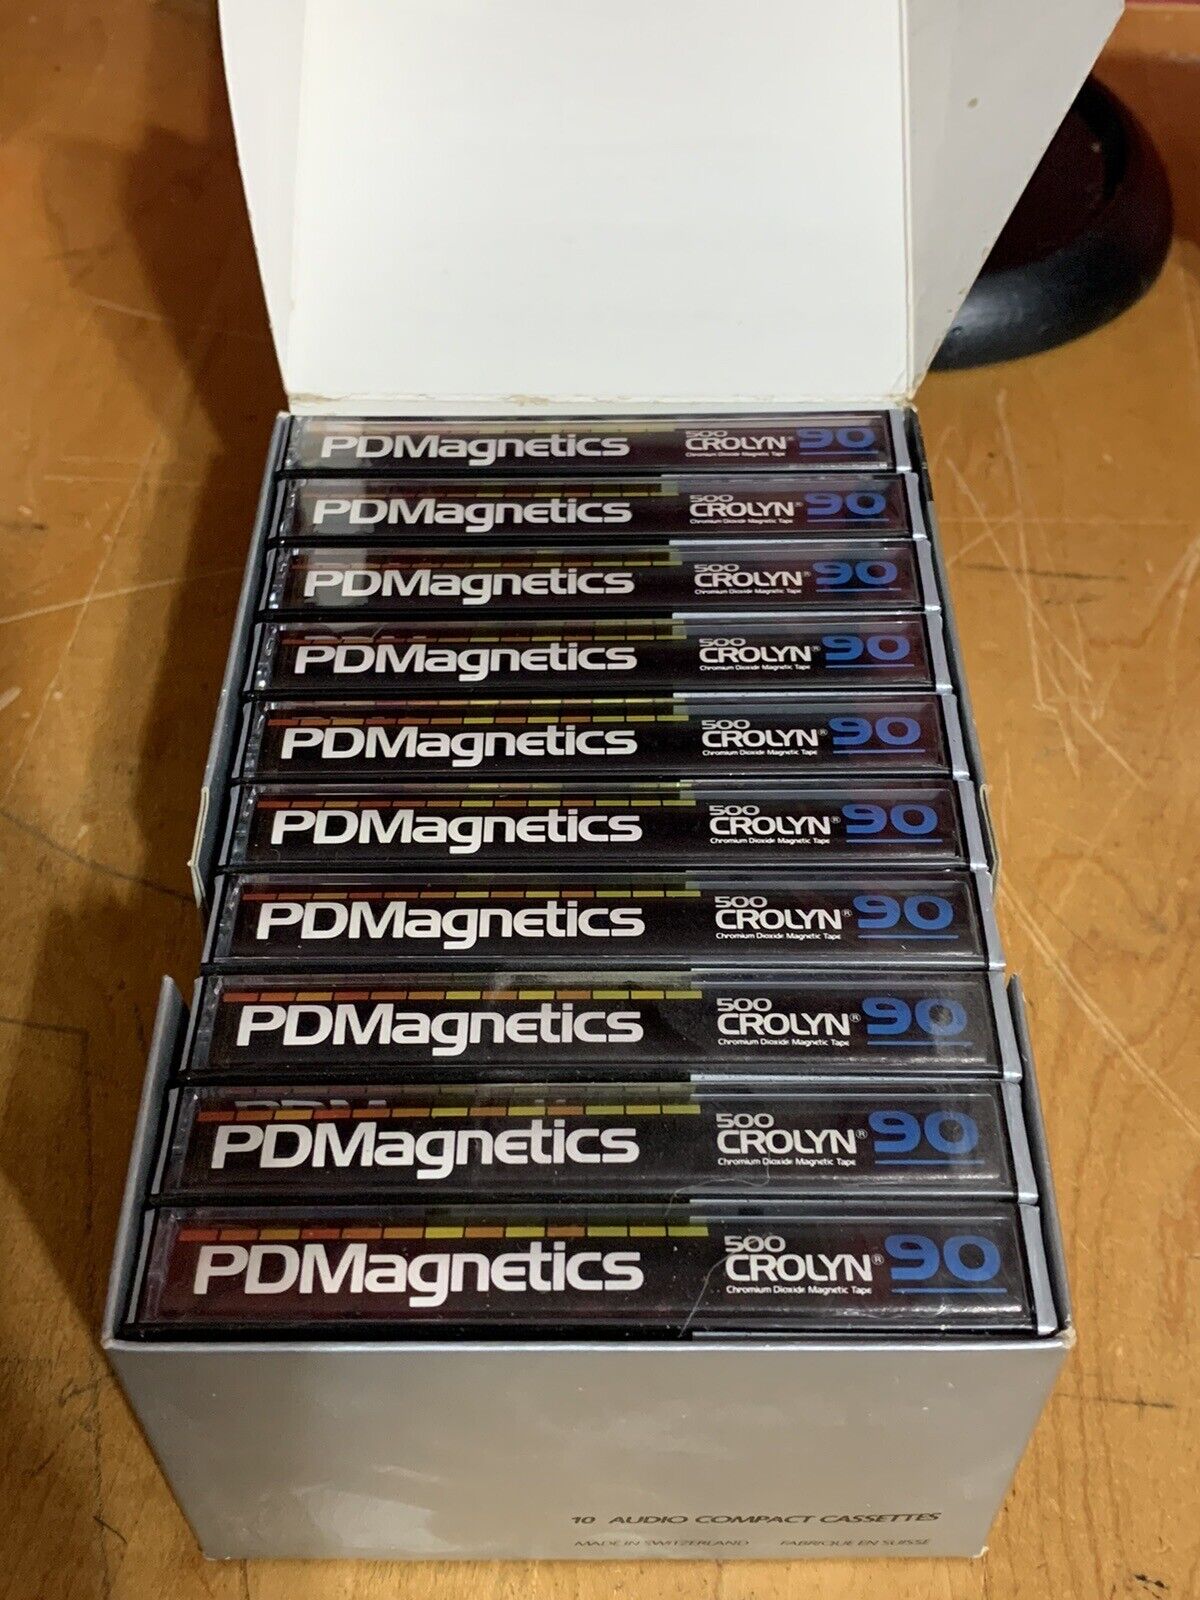 (10) PDMagnetics DuPont 500 CROLYN 90 Type II CrO2 Blank Cassette Tapes -Sealed Dupont Phillips 500 Crolyn